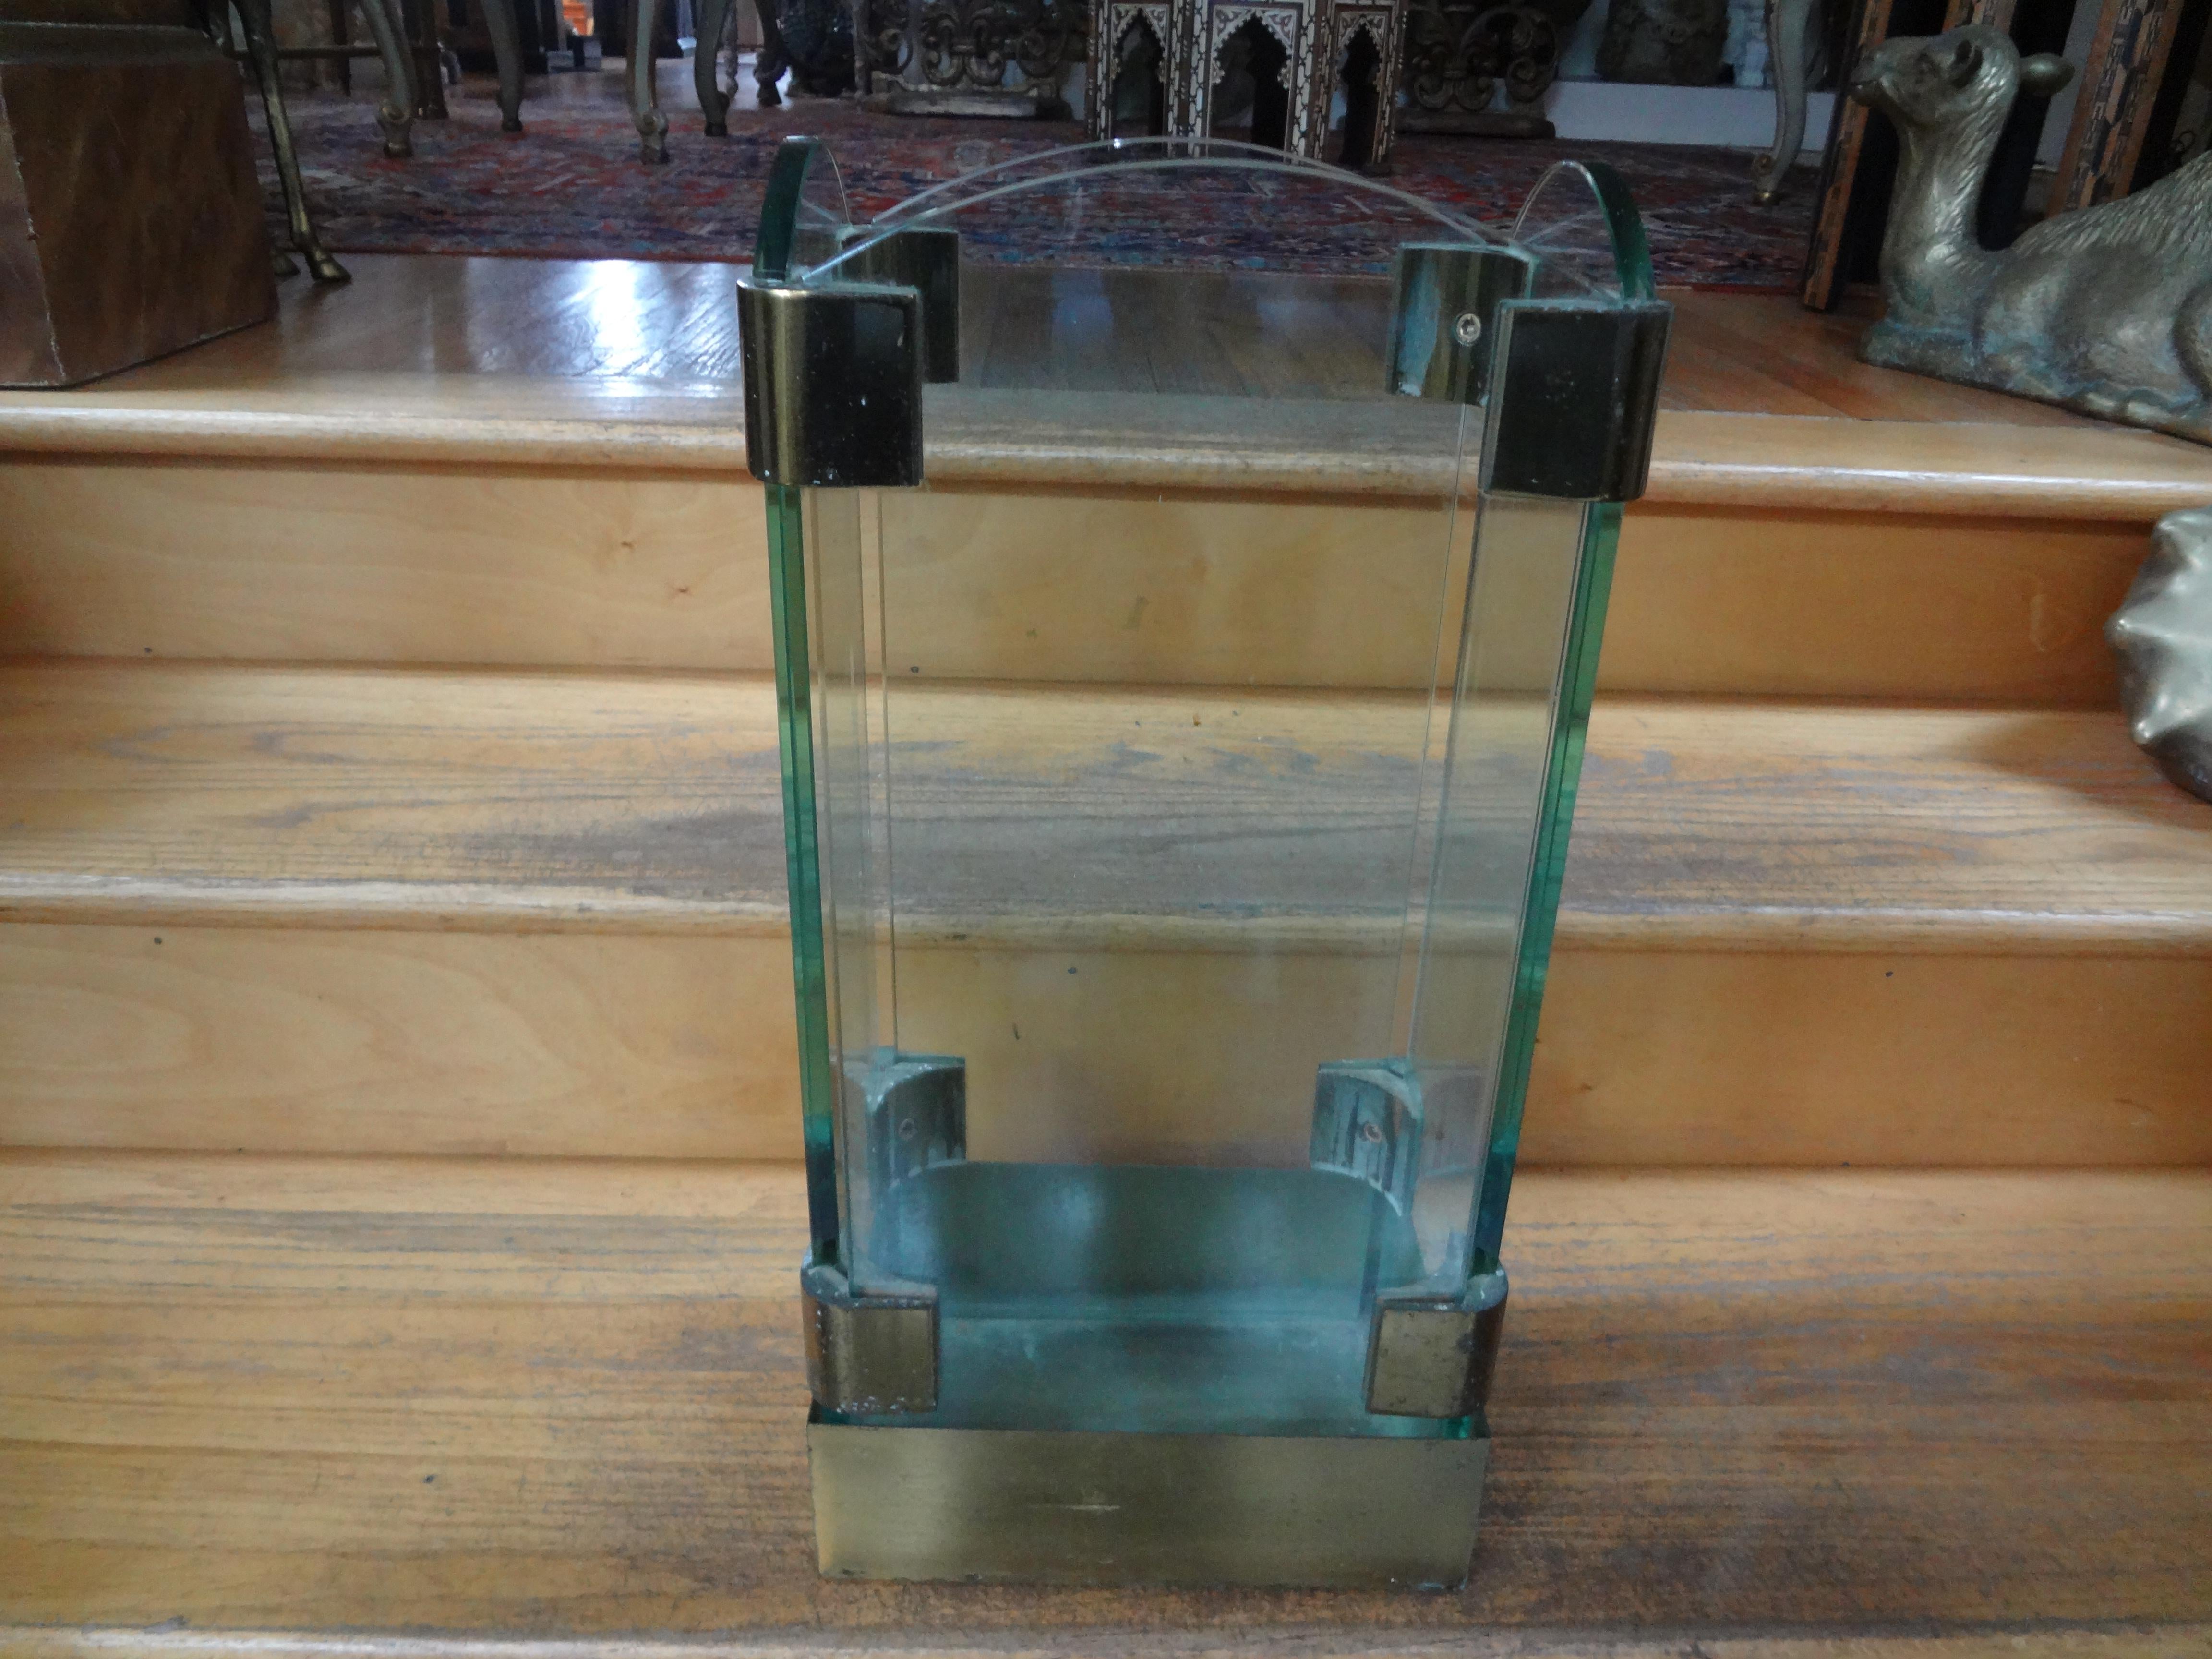 Italian Modern Brass And Glass Umbrella Stand.
Offered is stylish Italian mid century modern brass and glass umbrella stand in the manner of Max Ingrand For Fontana Arte
Age related patina to the brass.
